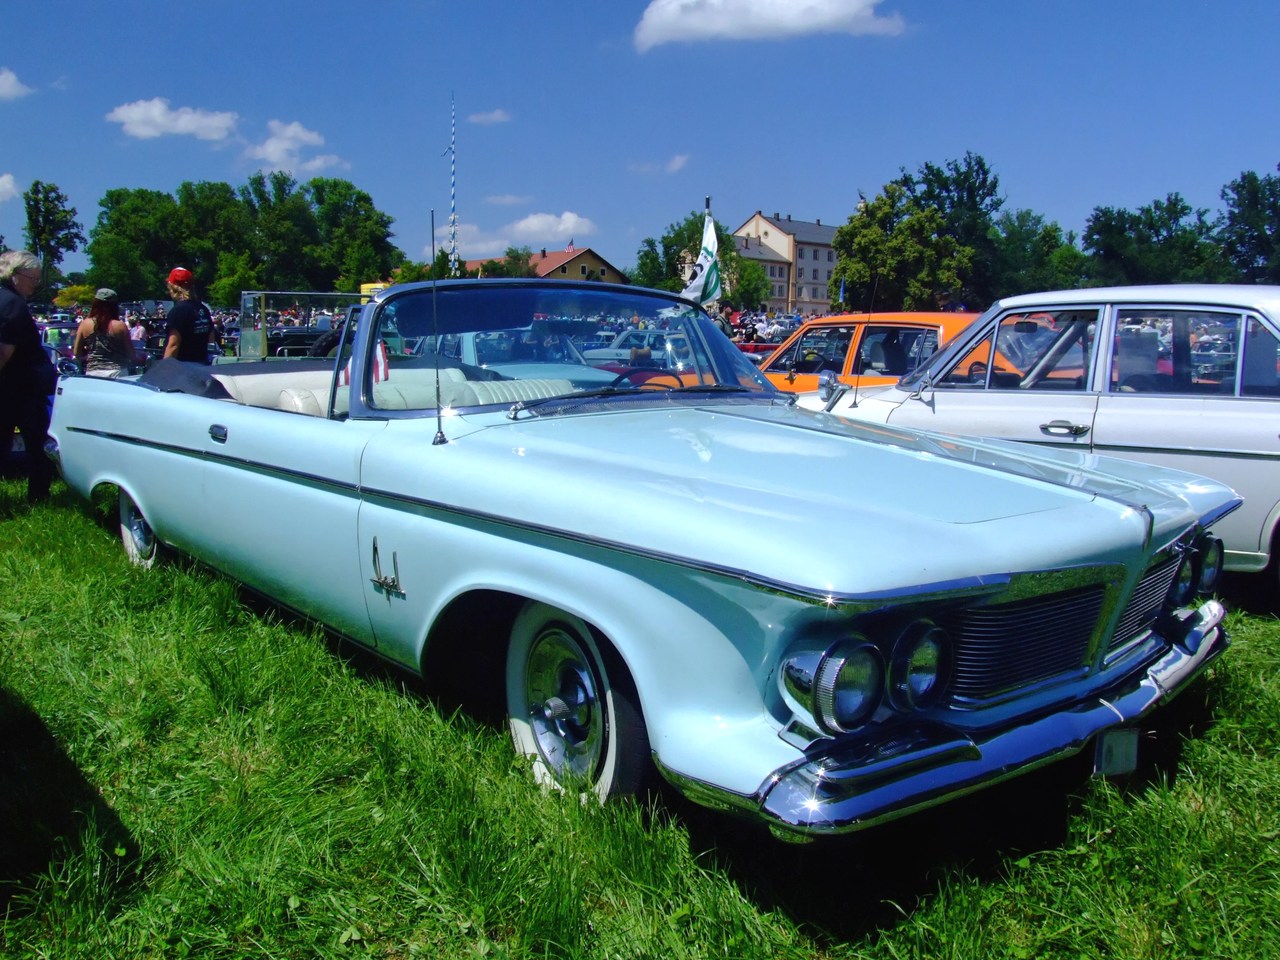 File:Imperial Crown Convertible 1962 1.jpg - Wikimedia Commons